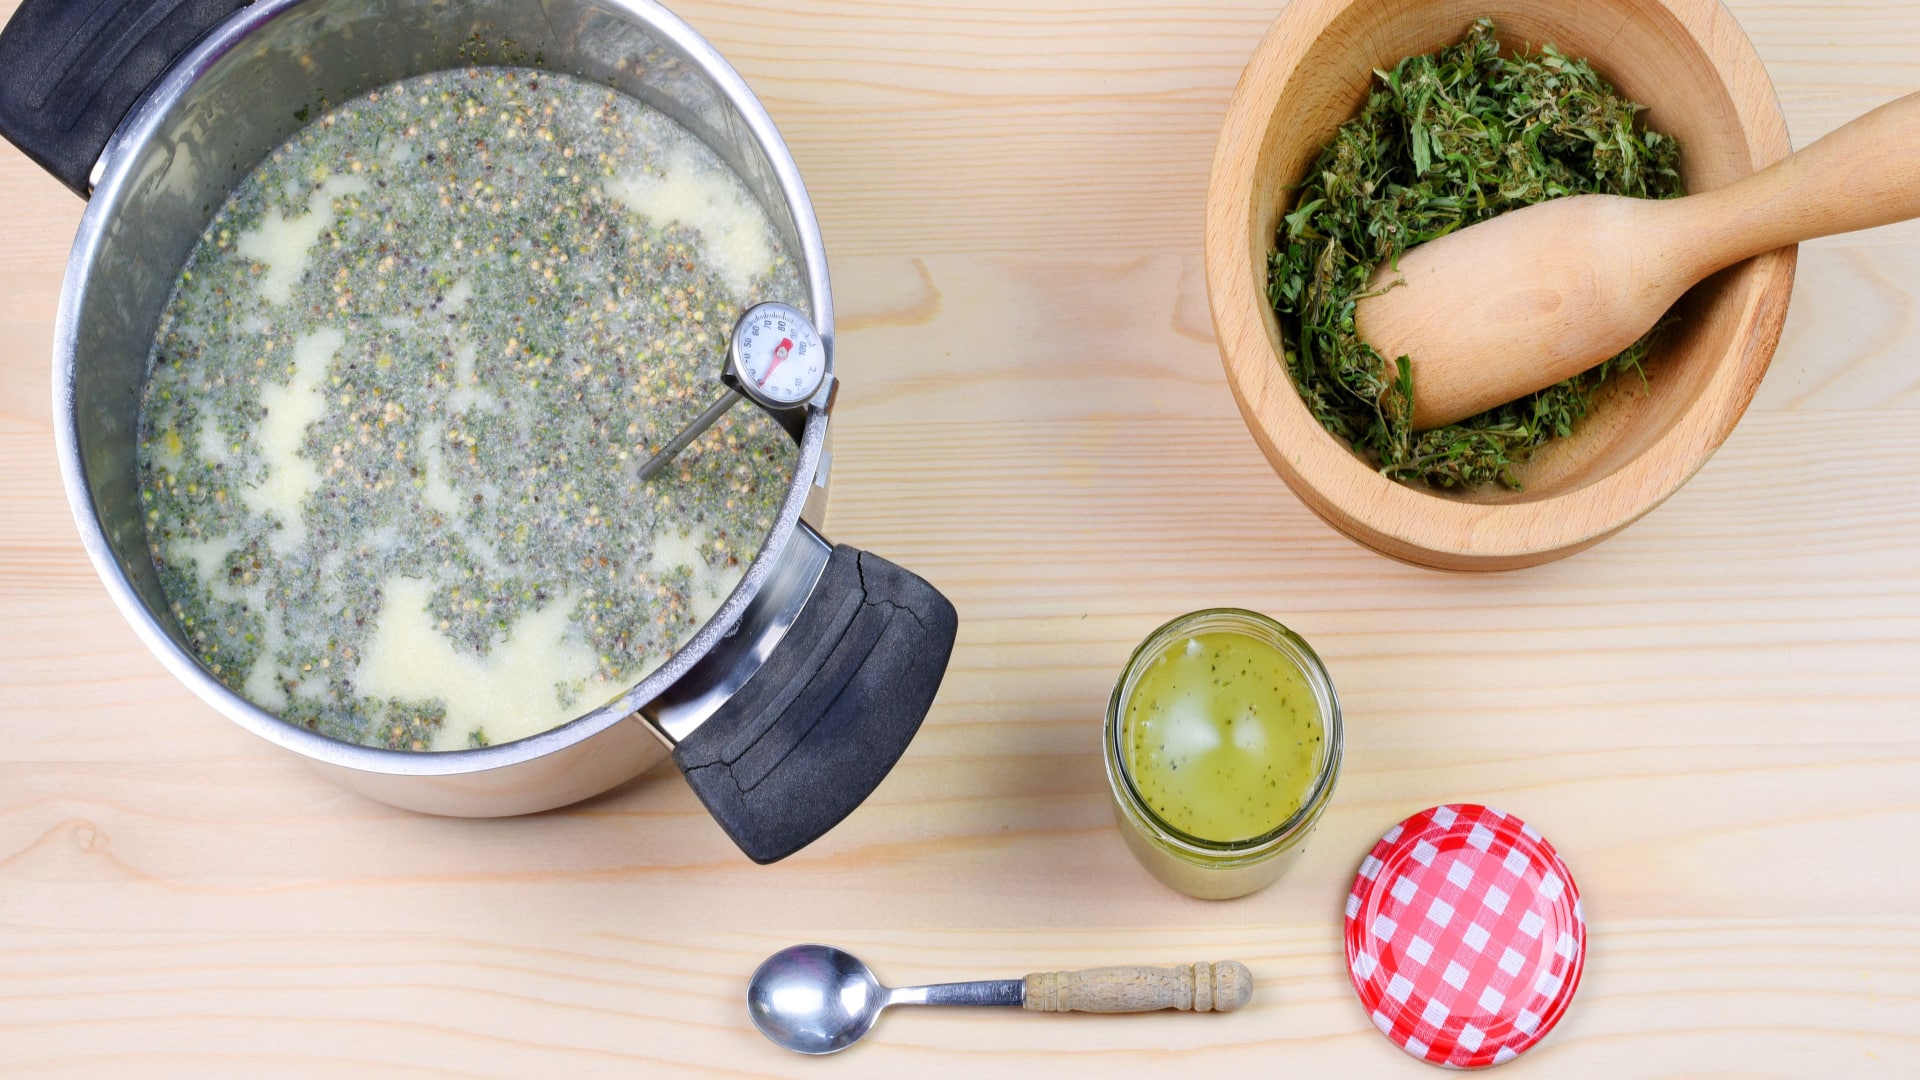 Cannabinthusiast | Cook Up Your Own Cannabutter